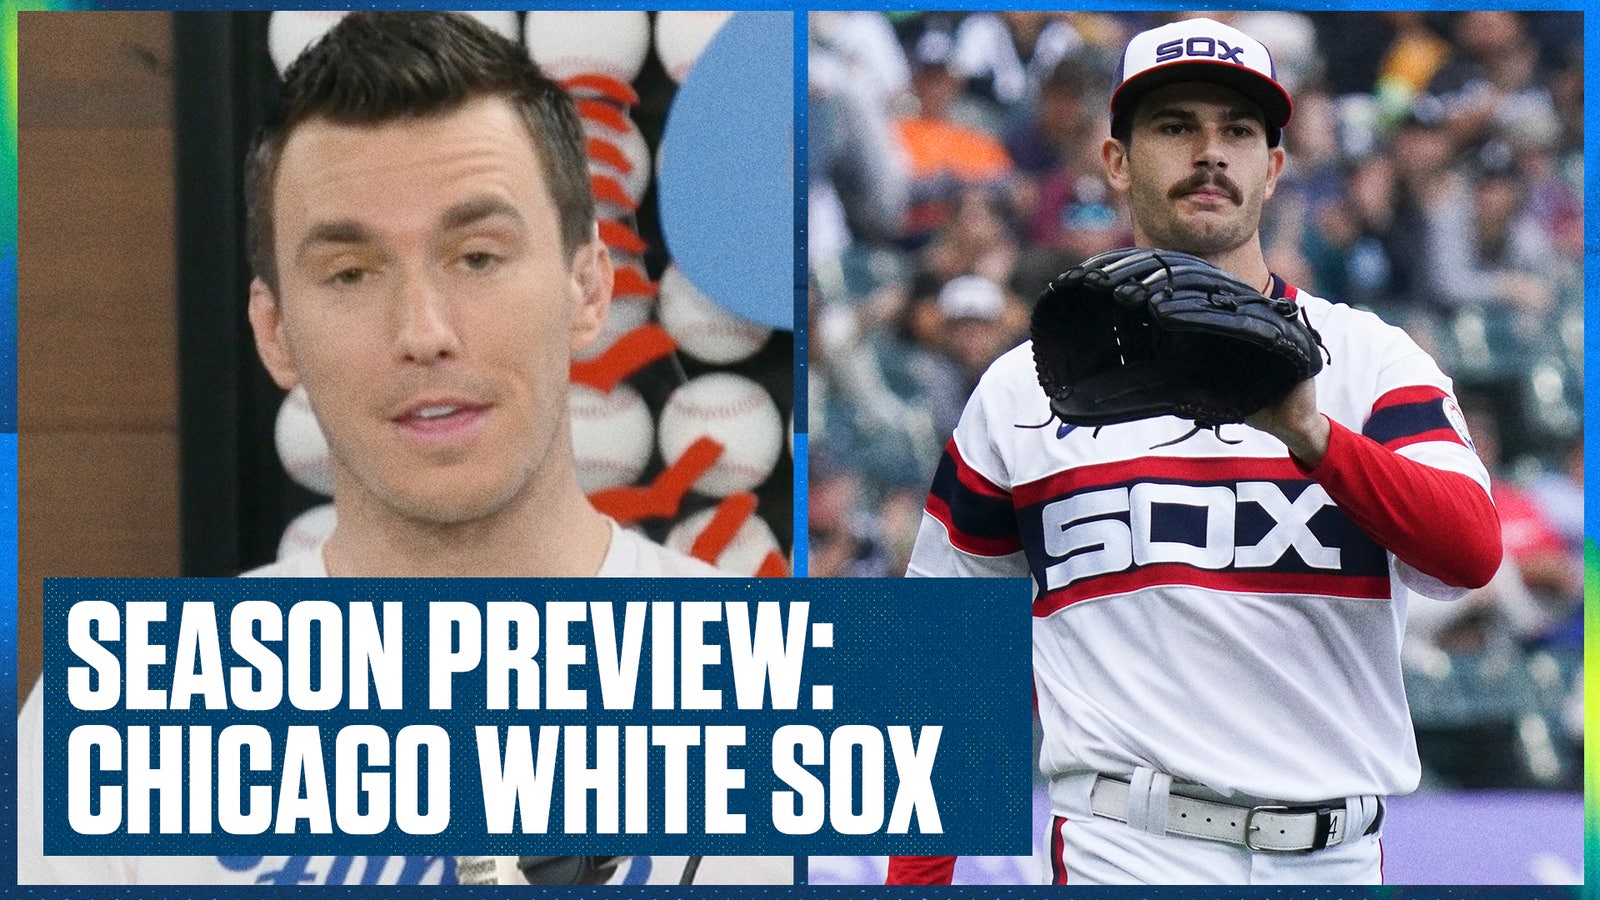 White Sox season preview: Can they bounce back from last year's disaster?